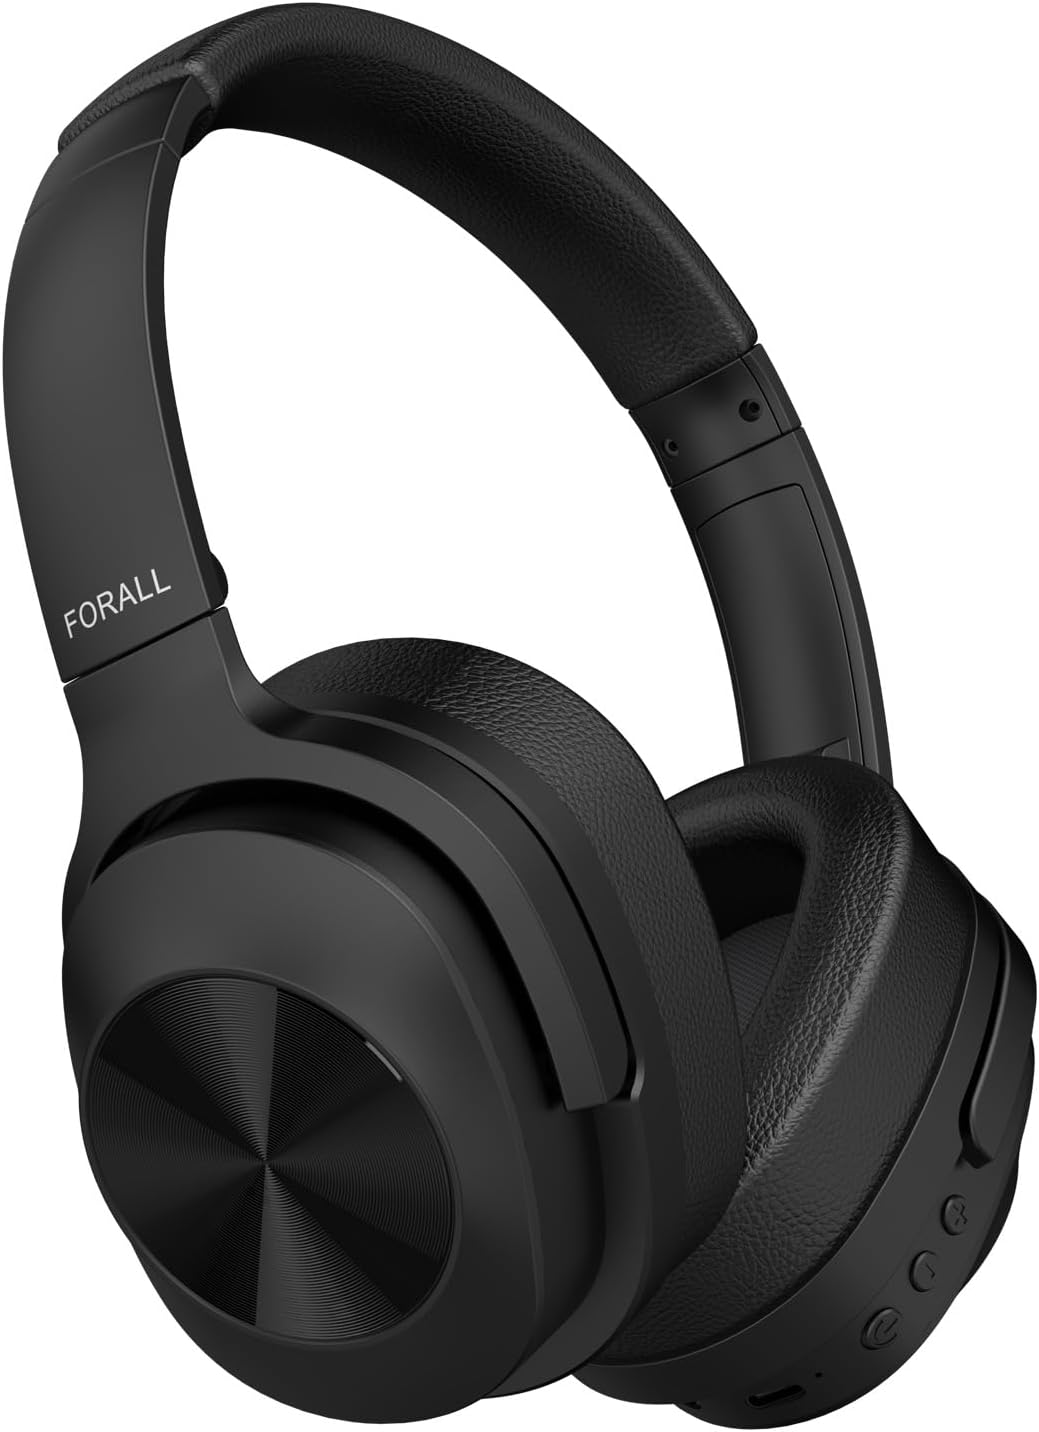 Great comfort and an absolute bargain. The noise canceling feature works very well.